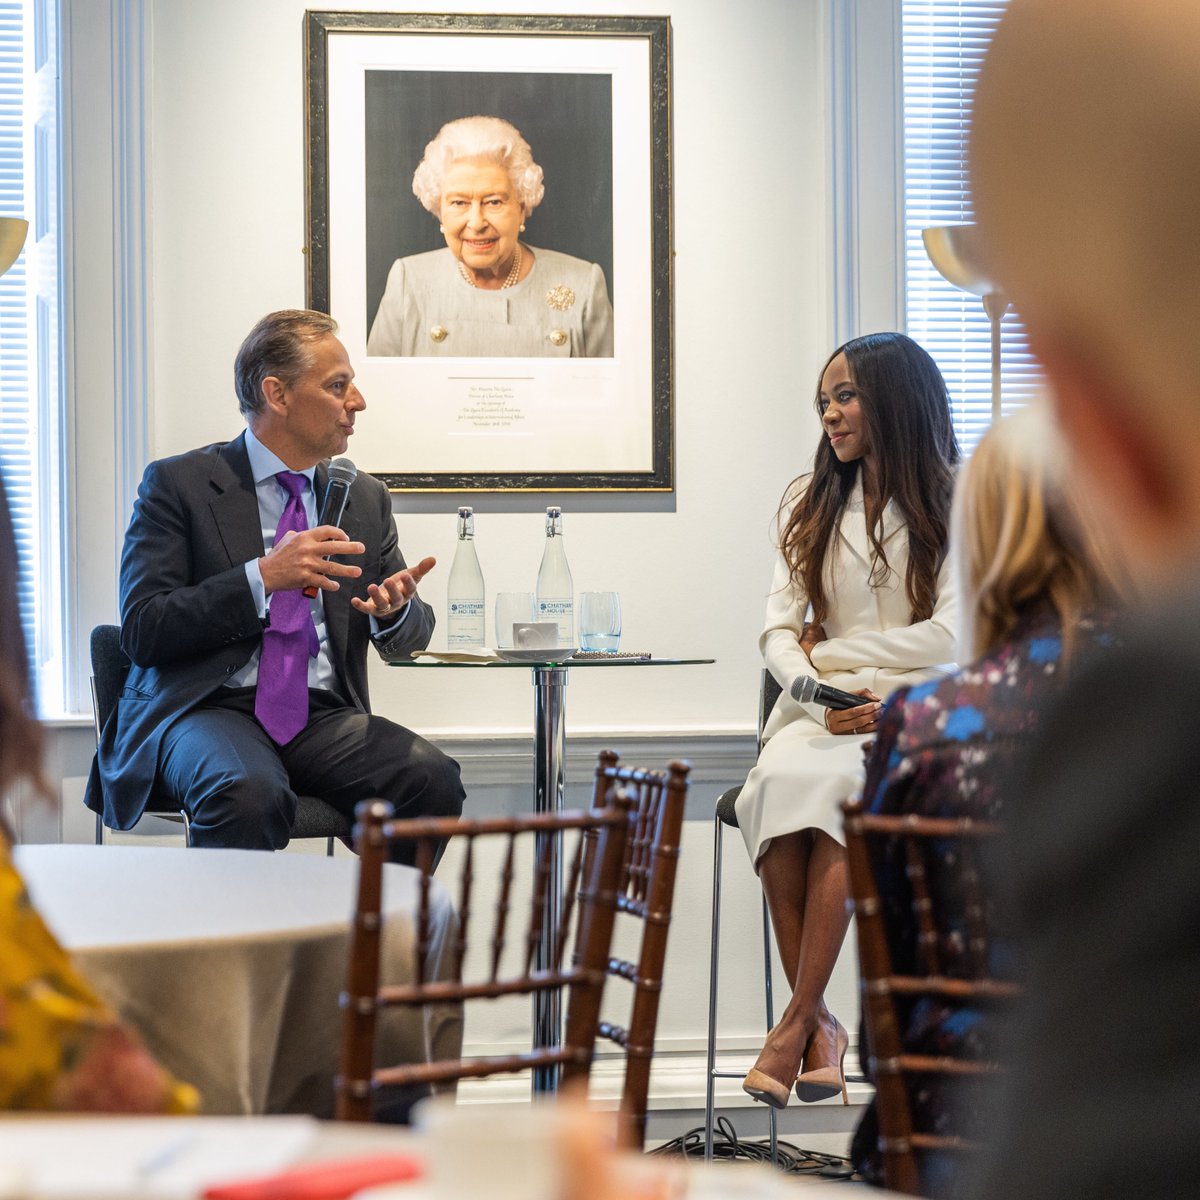 Had the pleasure of joining @huwsteenis at @OliverWyman's Leadership Reimagined event yesterday at @ChathamHouse.

We tackled a wide range of topics, spanning from economic growth amidst global challenges to inflation and the energy transition.

Video coming soon.

#DambisaMoyo